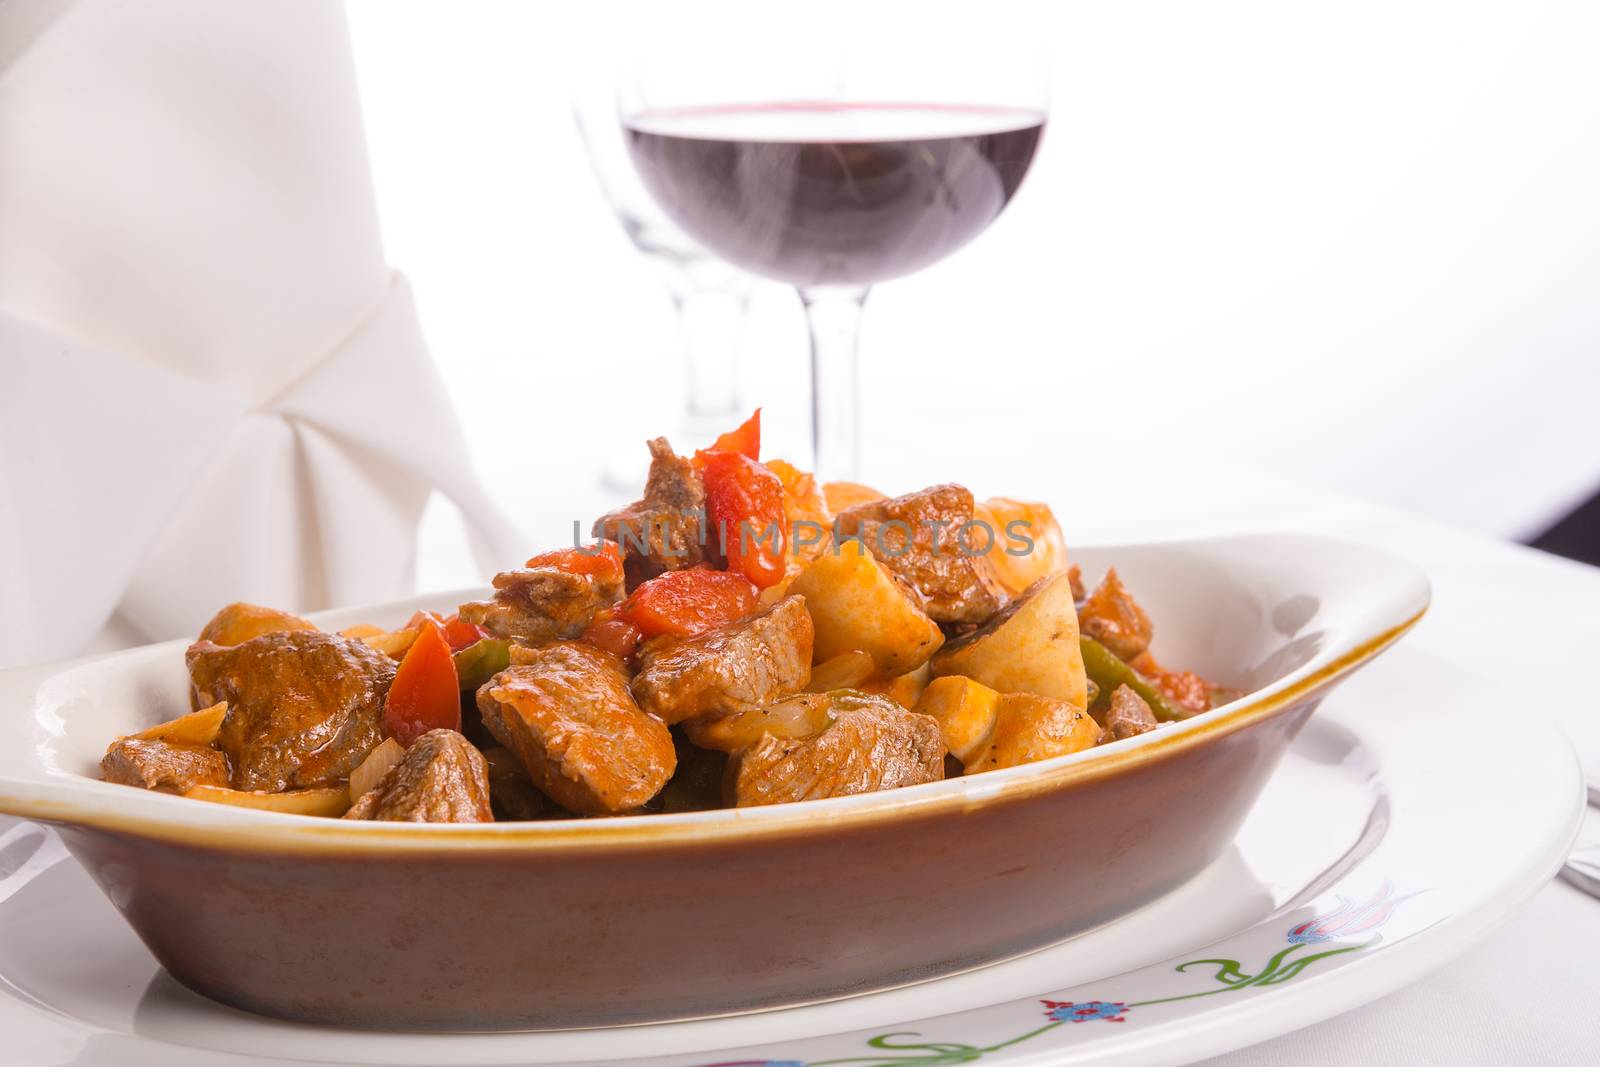 Beef Saute  with tomatoes, mushrooms and onions served in oval baking dish along with red wine